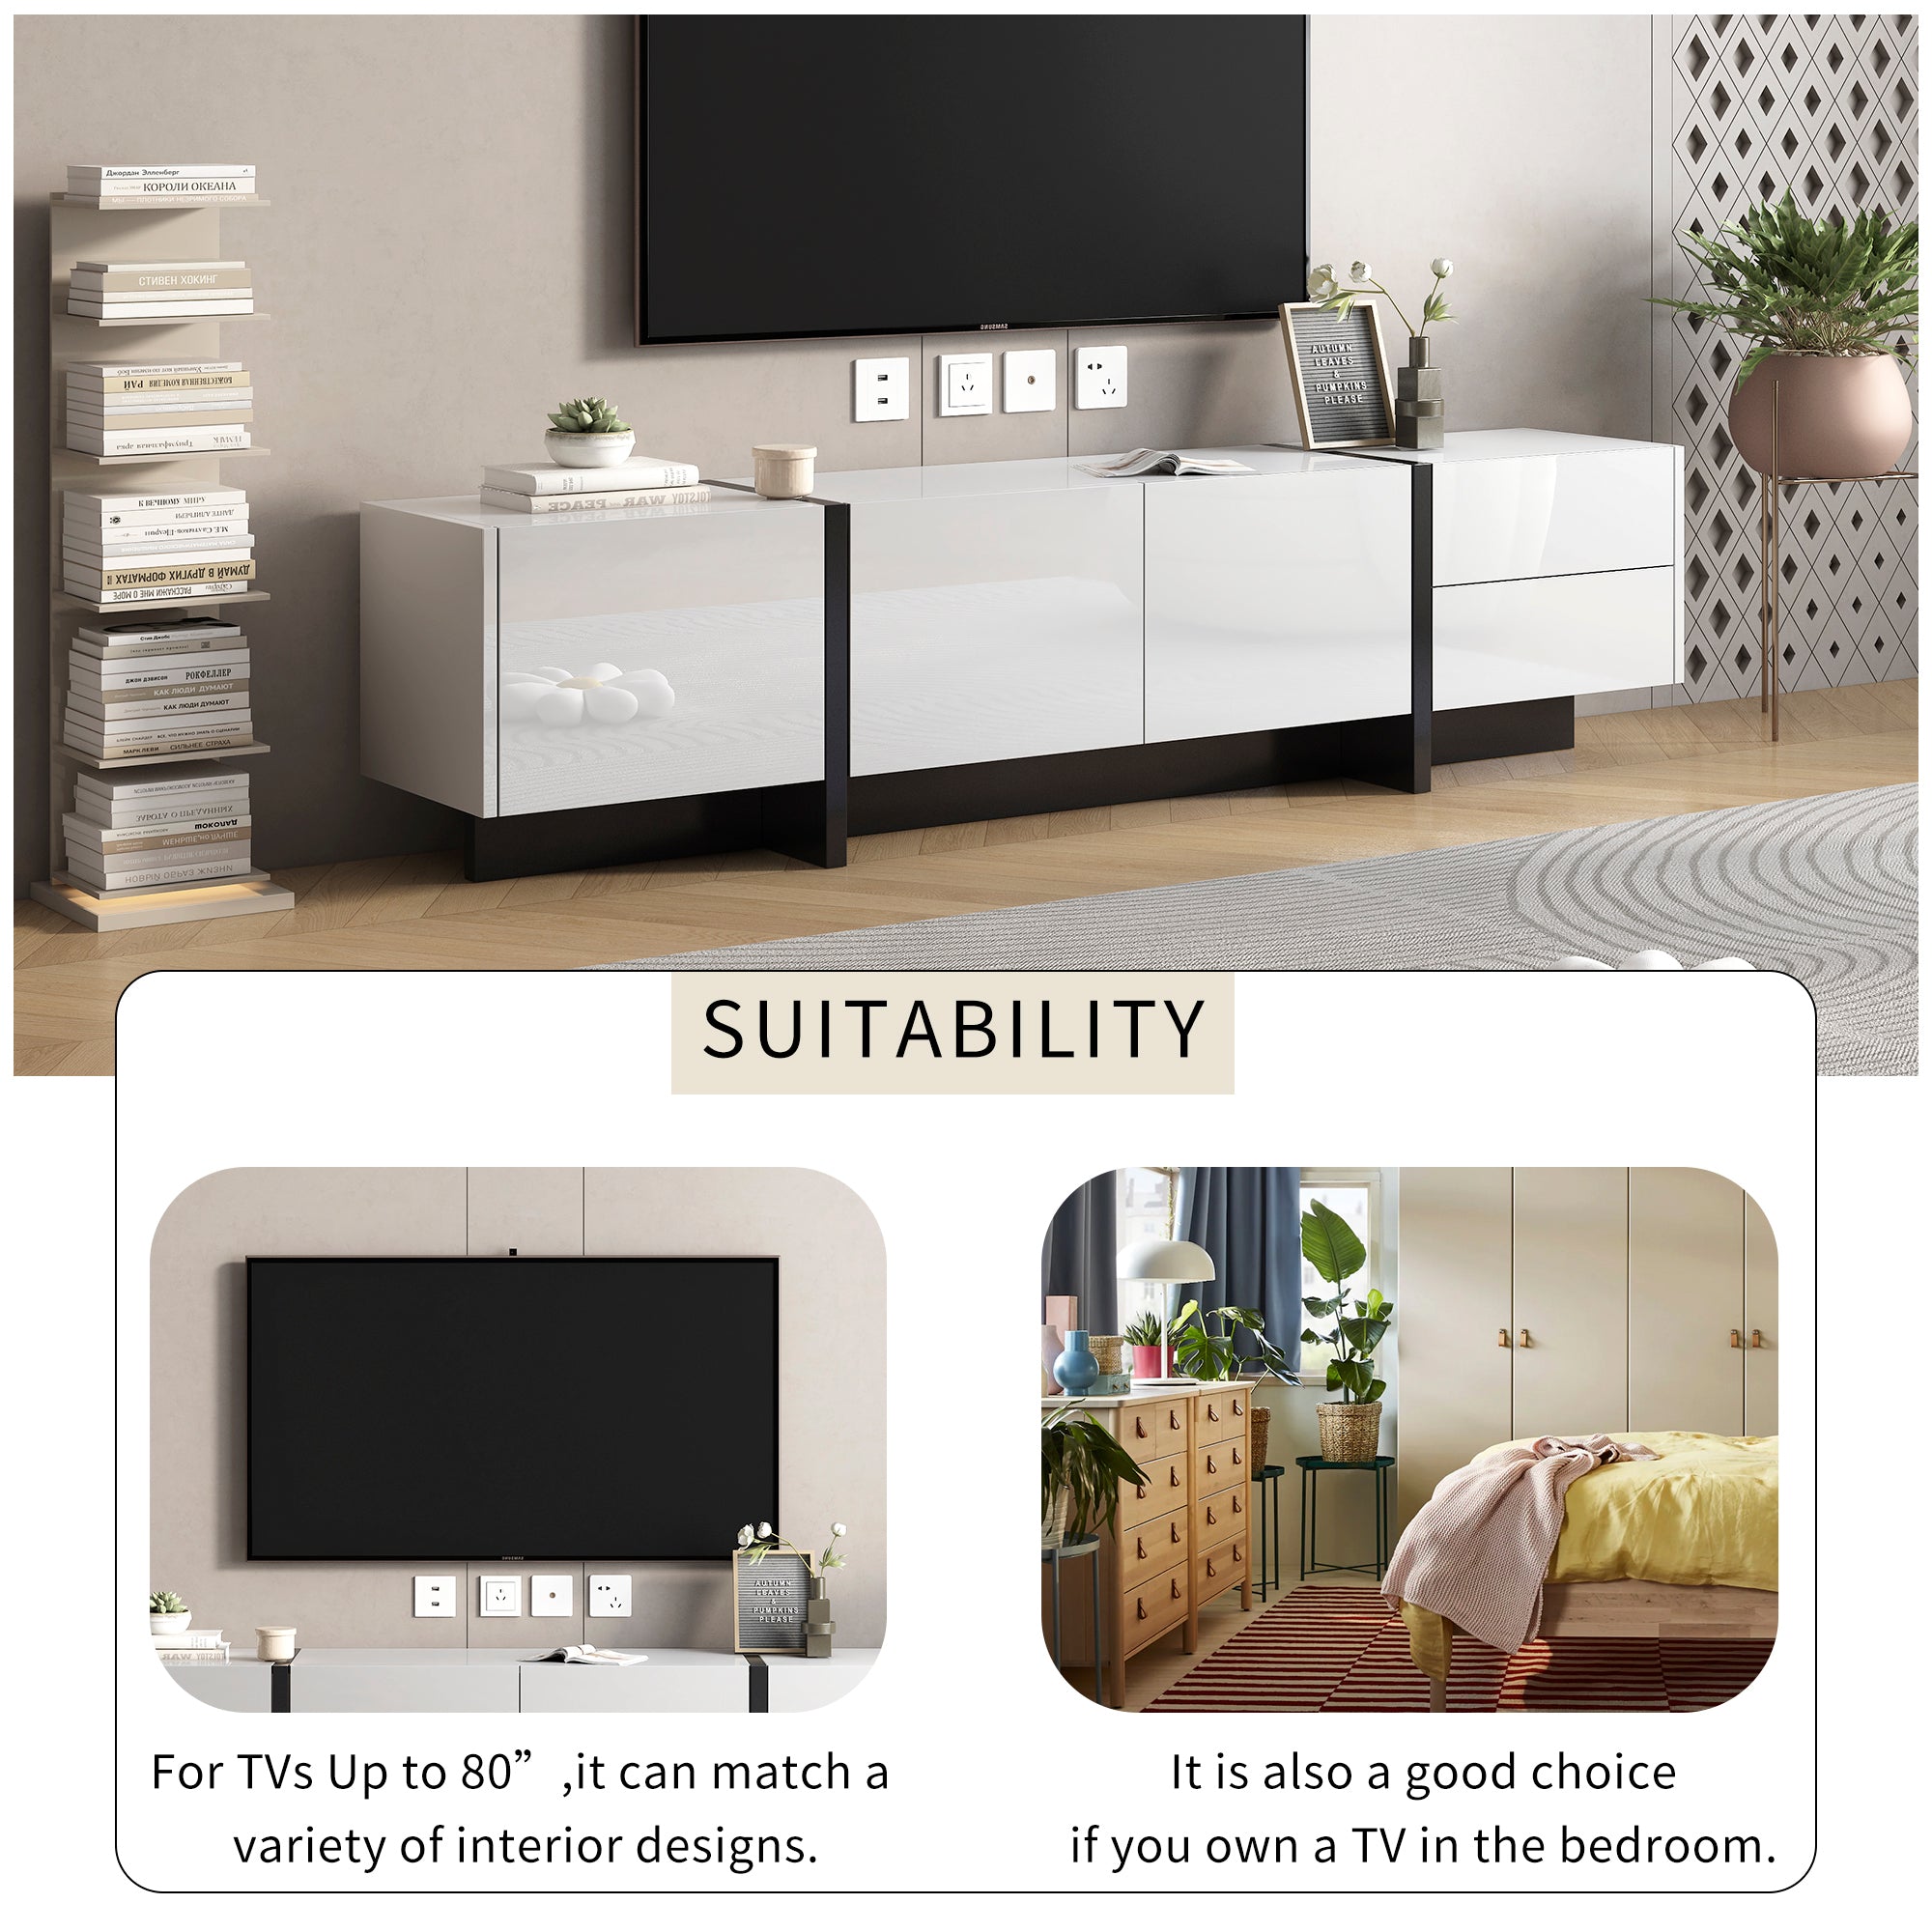 74.8" Modern High Glossy White & Black TV Stand for TV up to 86"